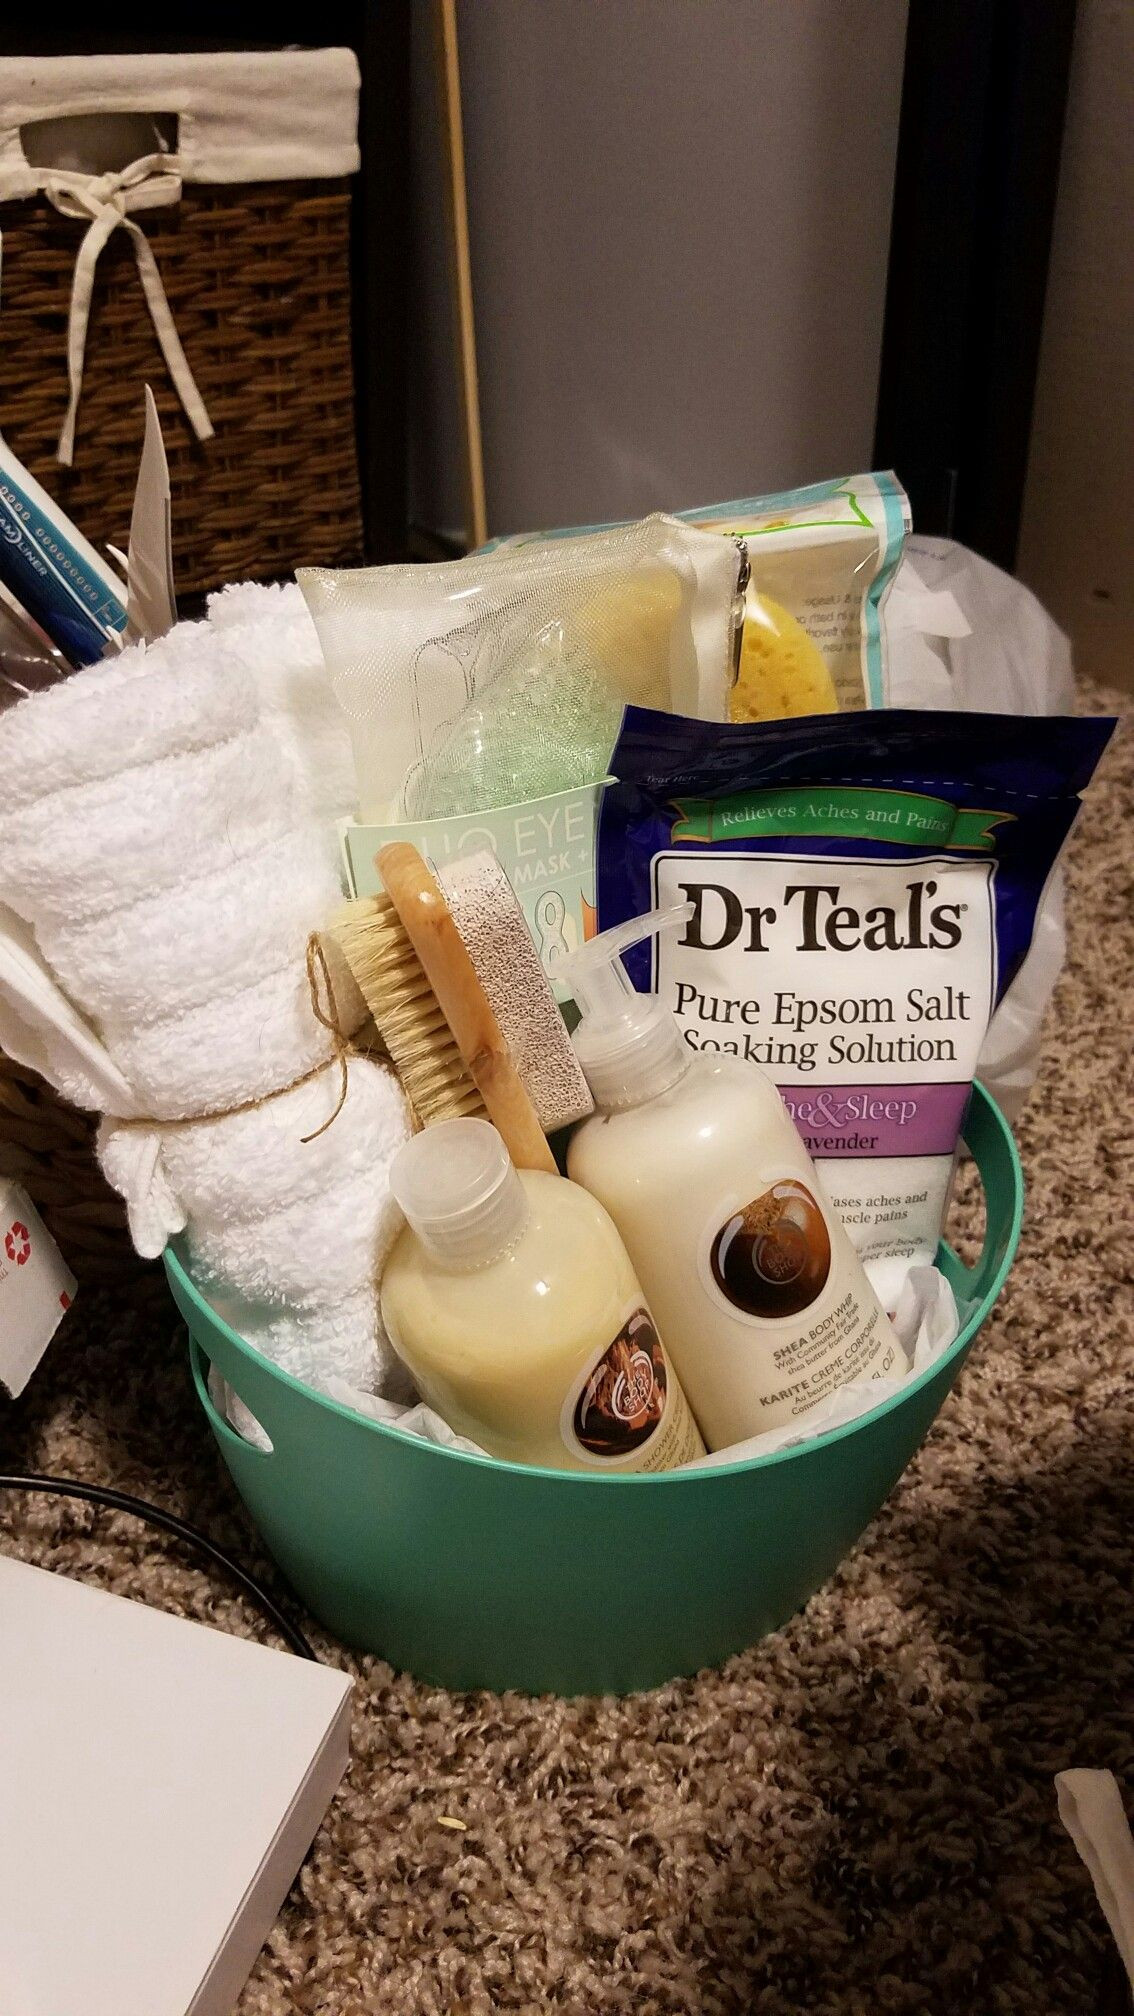 Work Gift Basket Ideas
 Spa Relaxation Gift Basket Silent auction fundraiser for